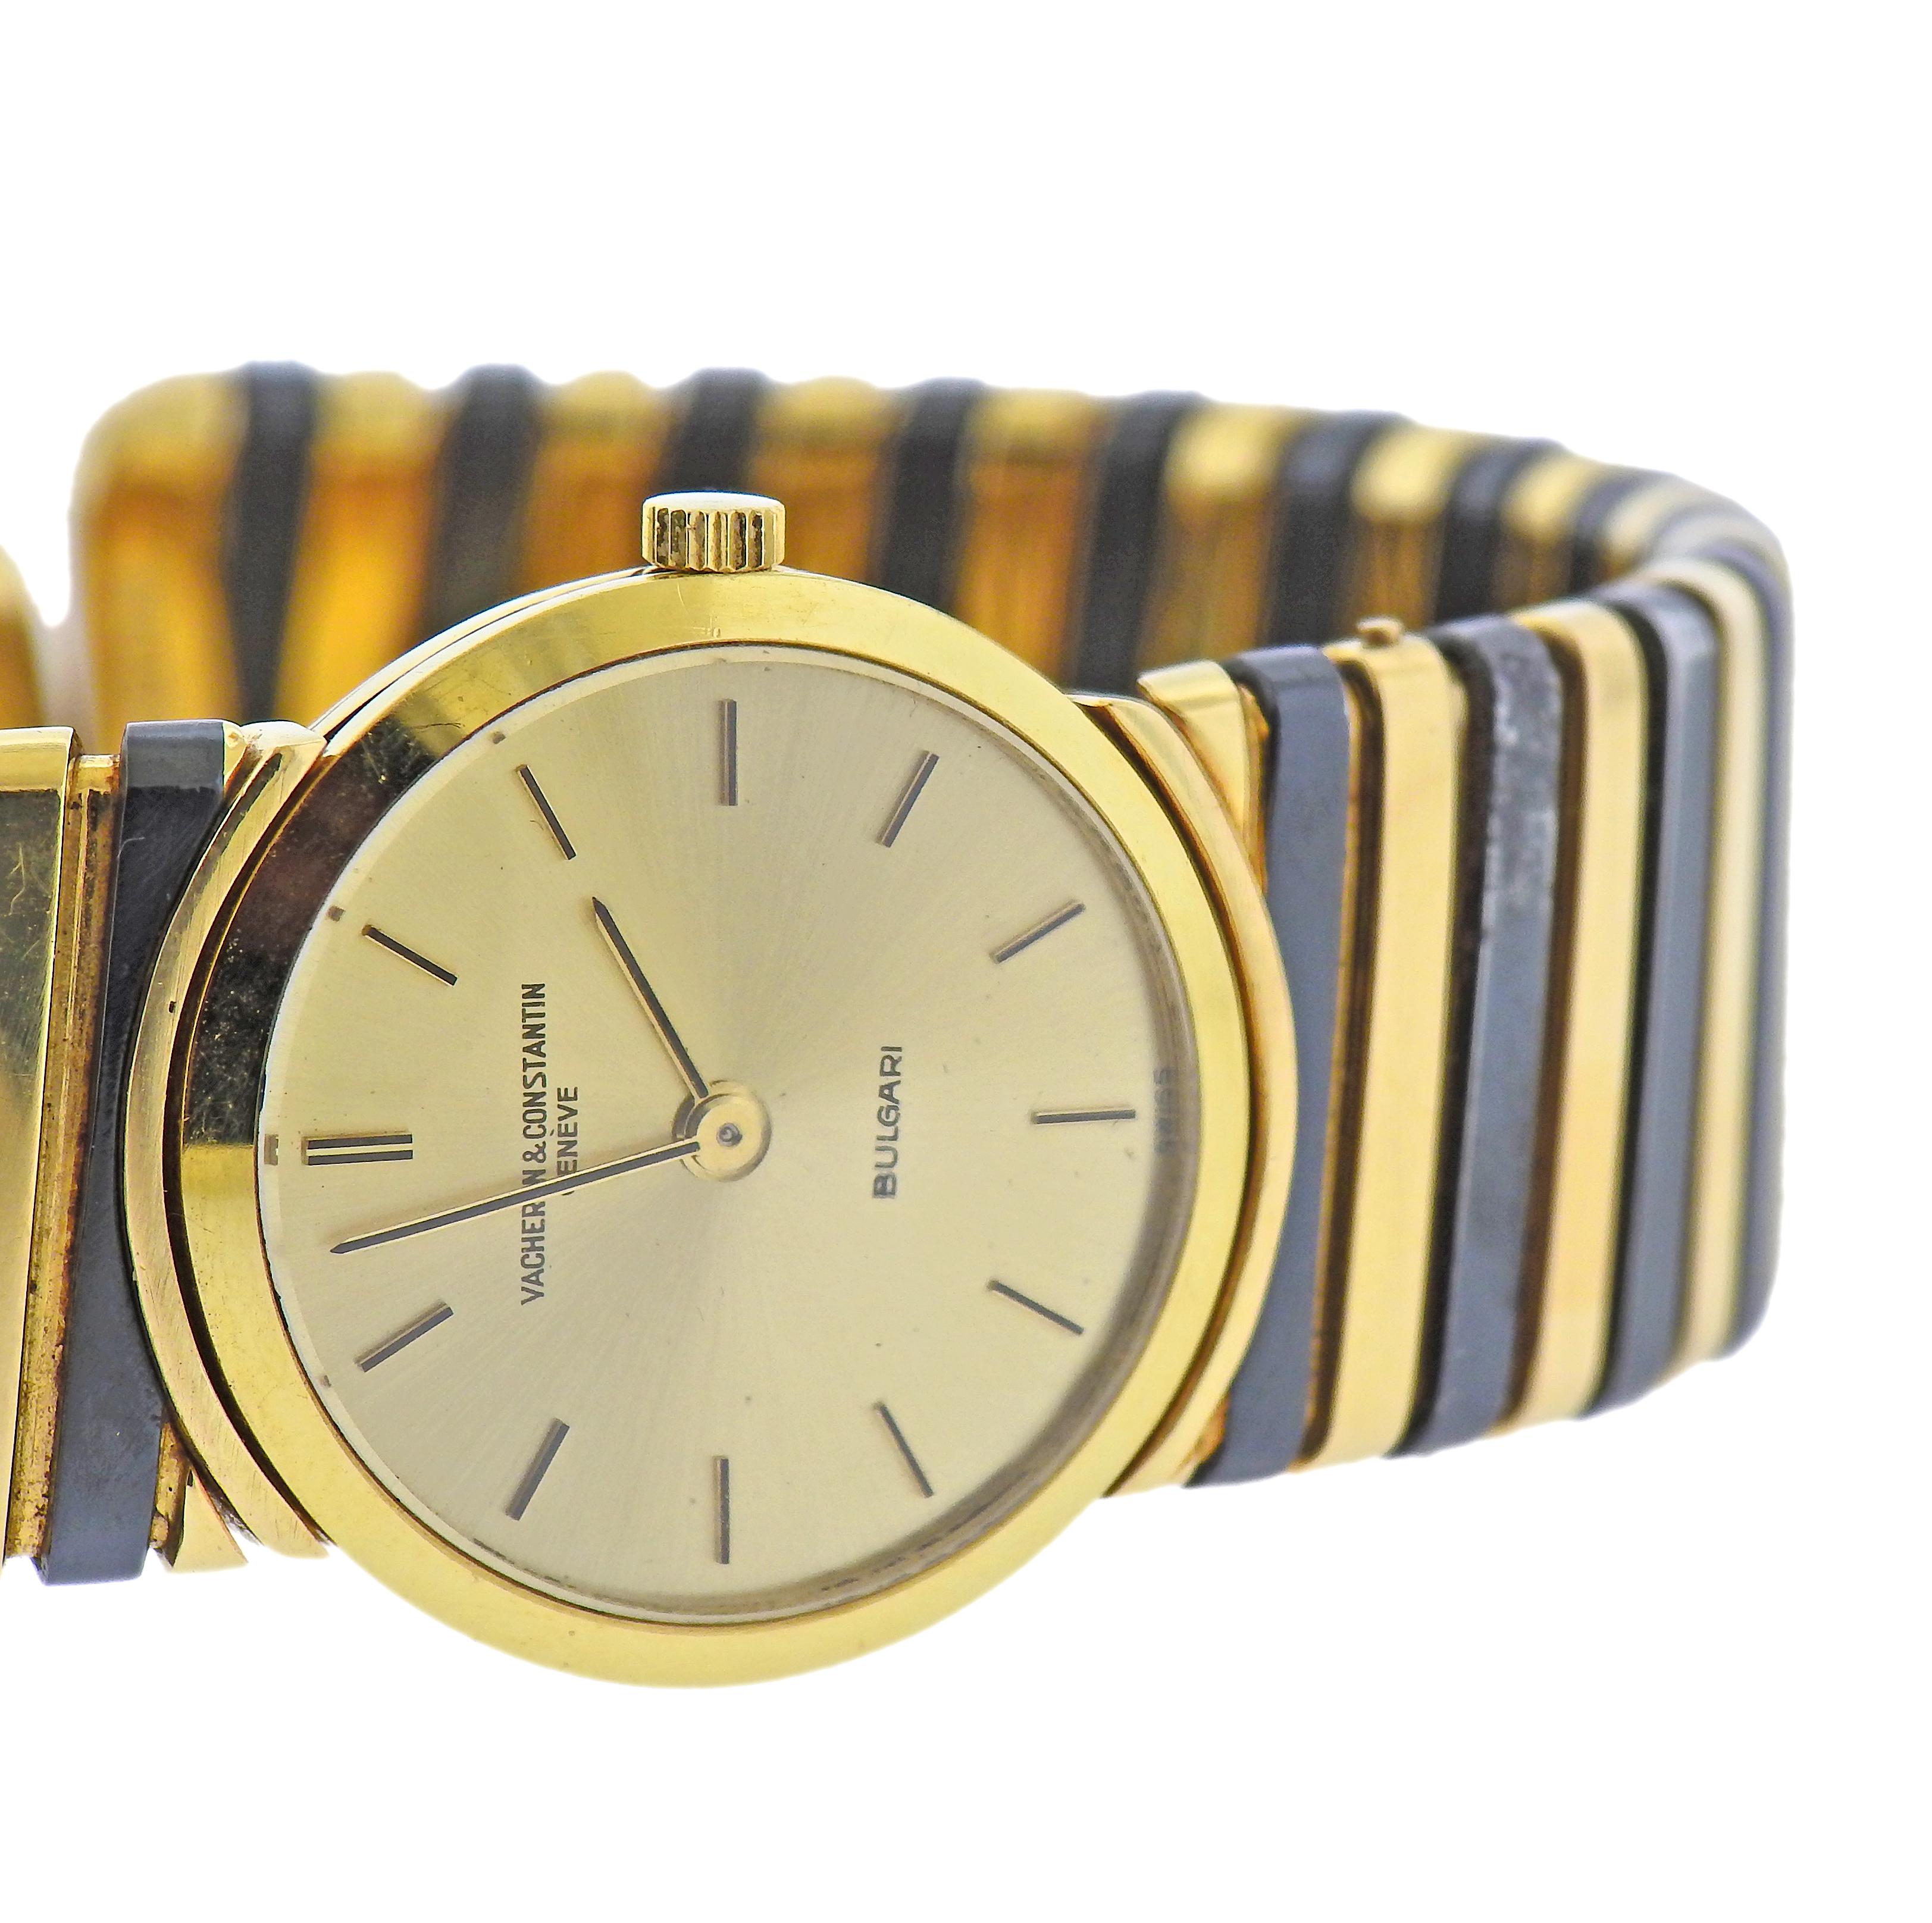 Vacheron Constantin Bulgari Gold Watch Bracelet In Excellent Condition For Sale In New York, NY